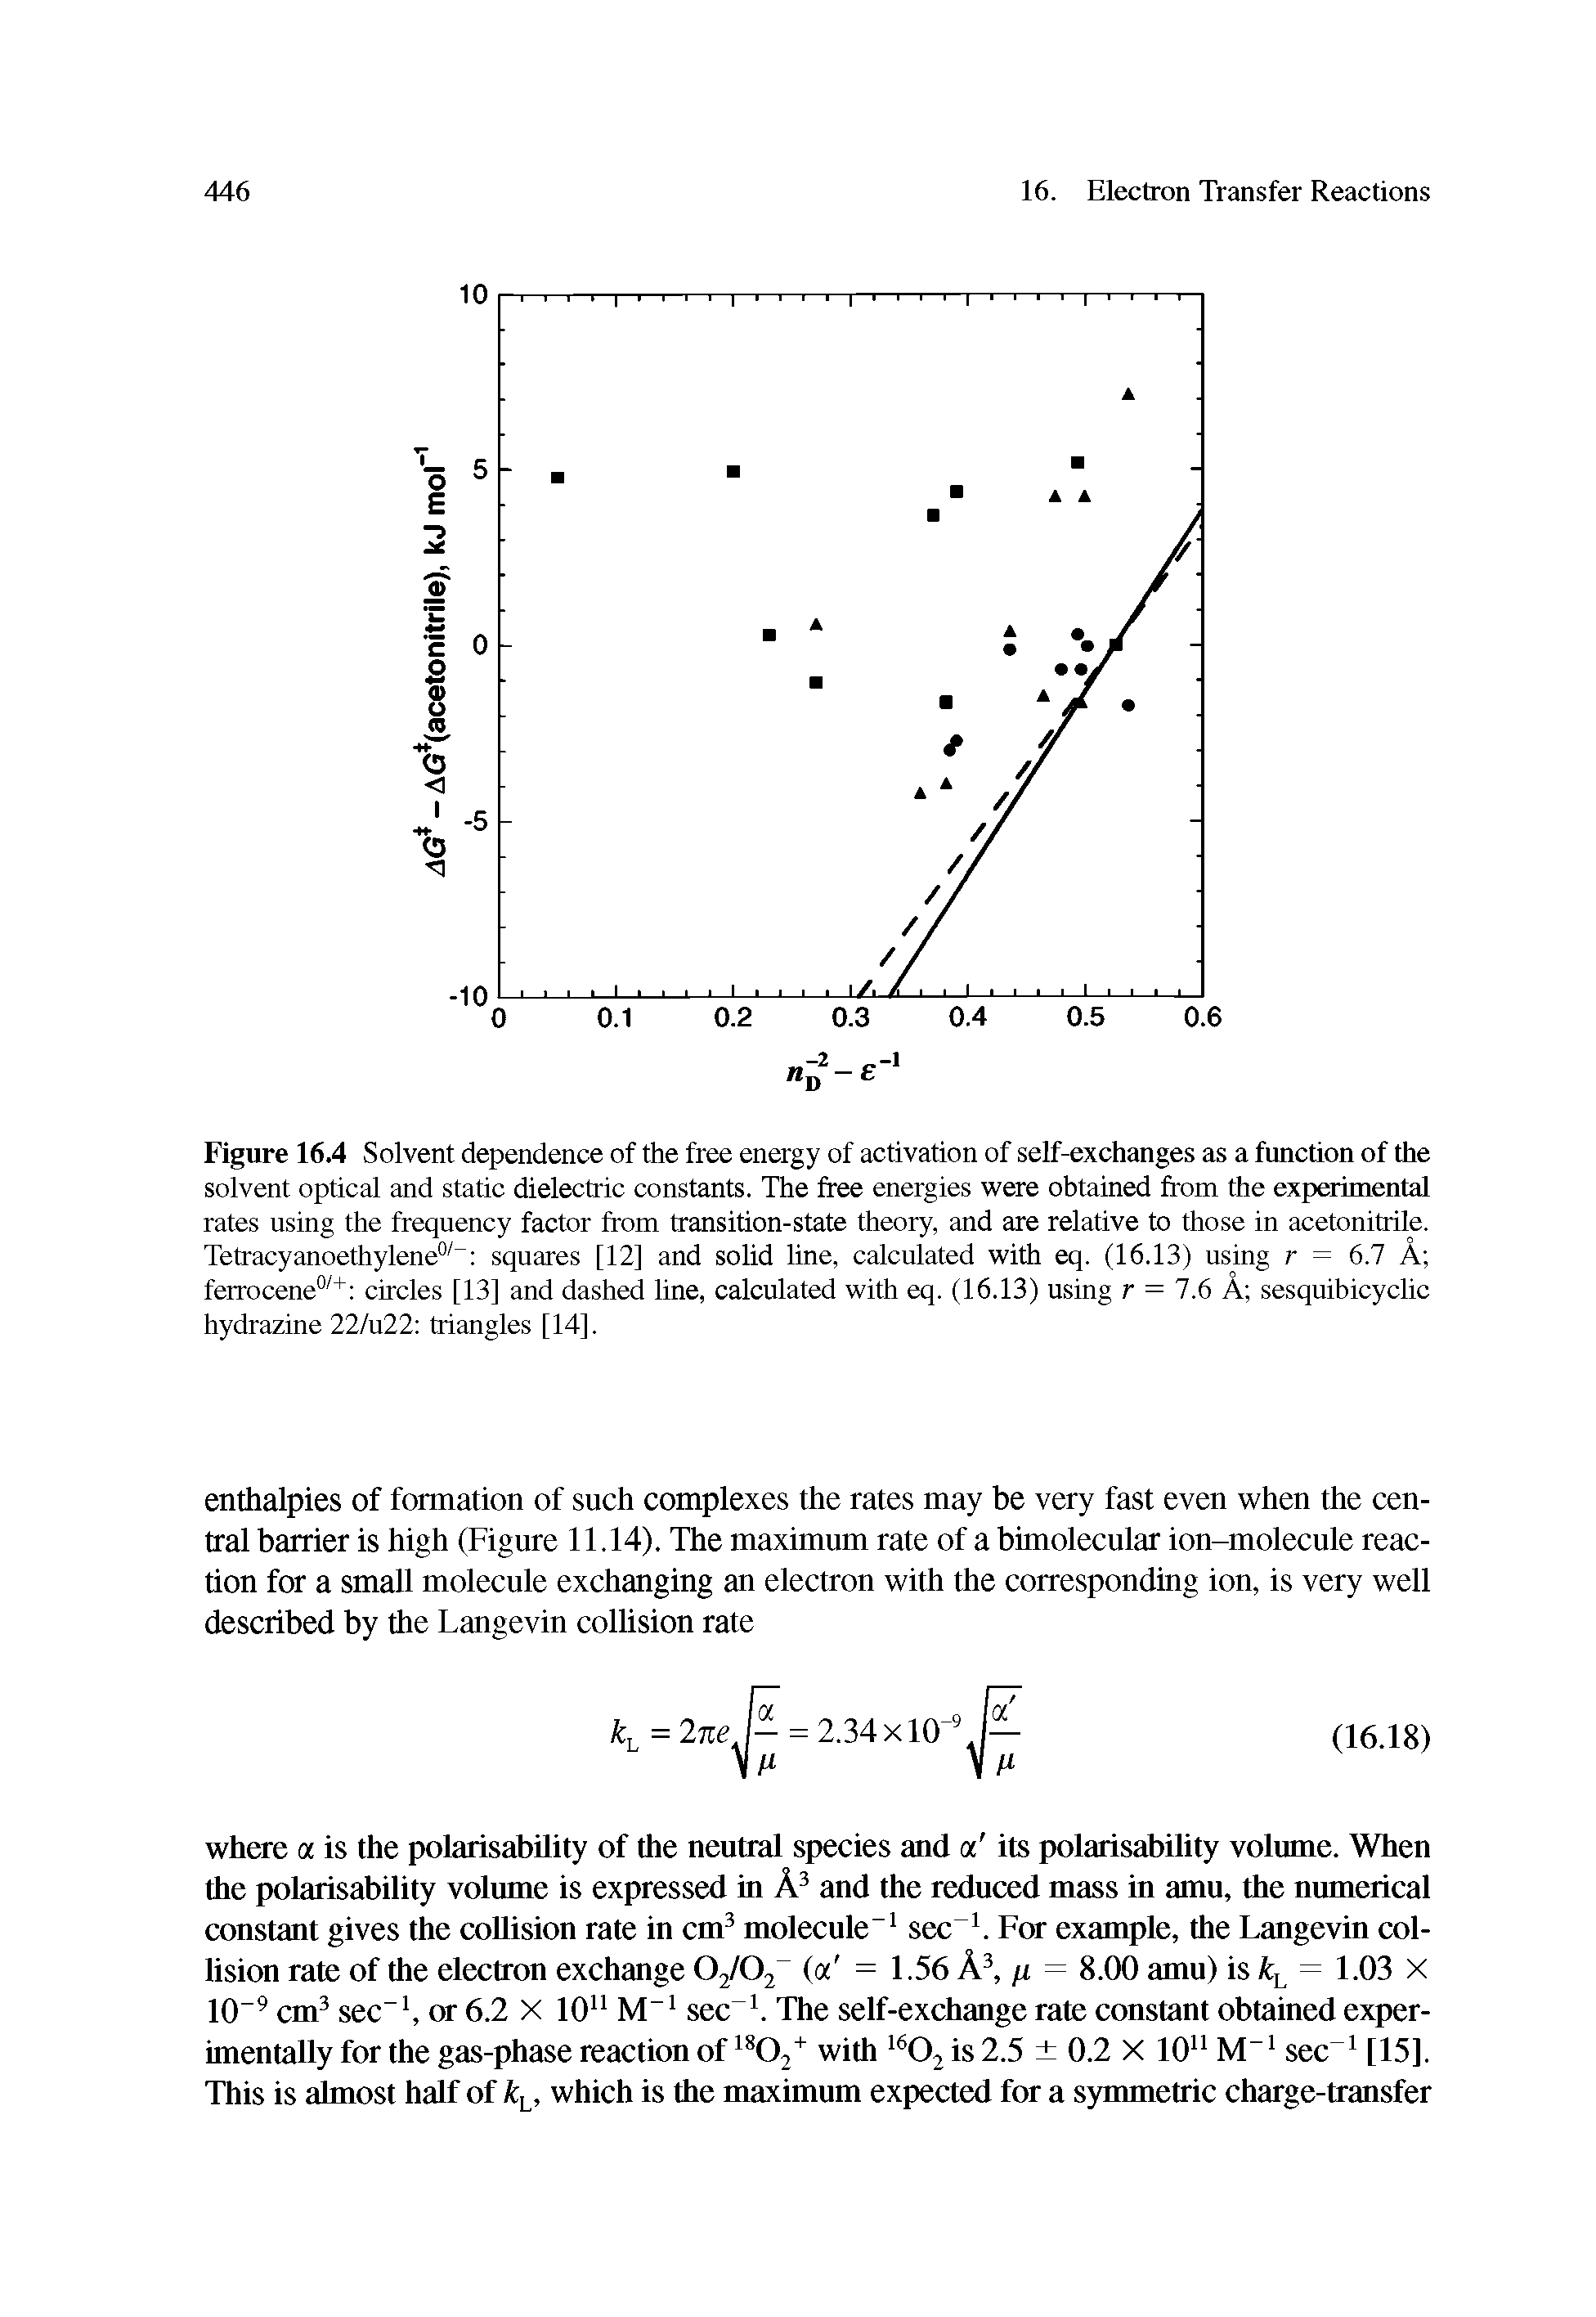 Figure 16.4 Solvent dependence of the free energy of activation of self-exchanges as a function of the solvent optical and static dielectric constants. The free energies were obtained from the experimental rates using the frequency factor from transition-state theory, and are relative to those in acetonitrile. Tetracyanoethylene " squares [12] and solid line, calculated with eq. (16.13) using r = 6.7 A ferrocene circles [13] and dashed line, calculated with eq. (16.13) using r = 7.6 A sesquibicyclic hydrazine 22/u22 triangles [14].